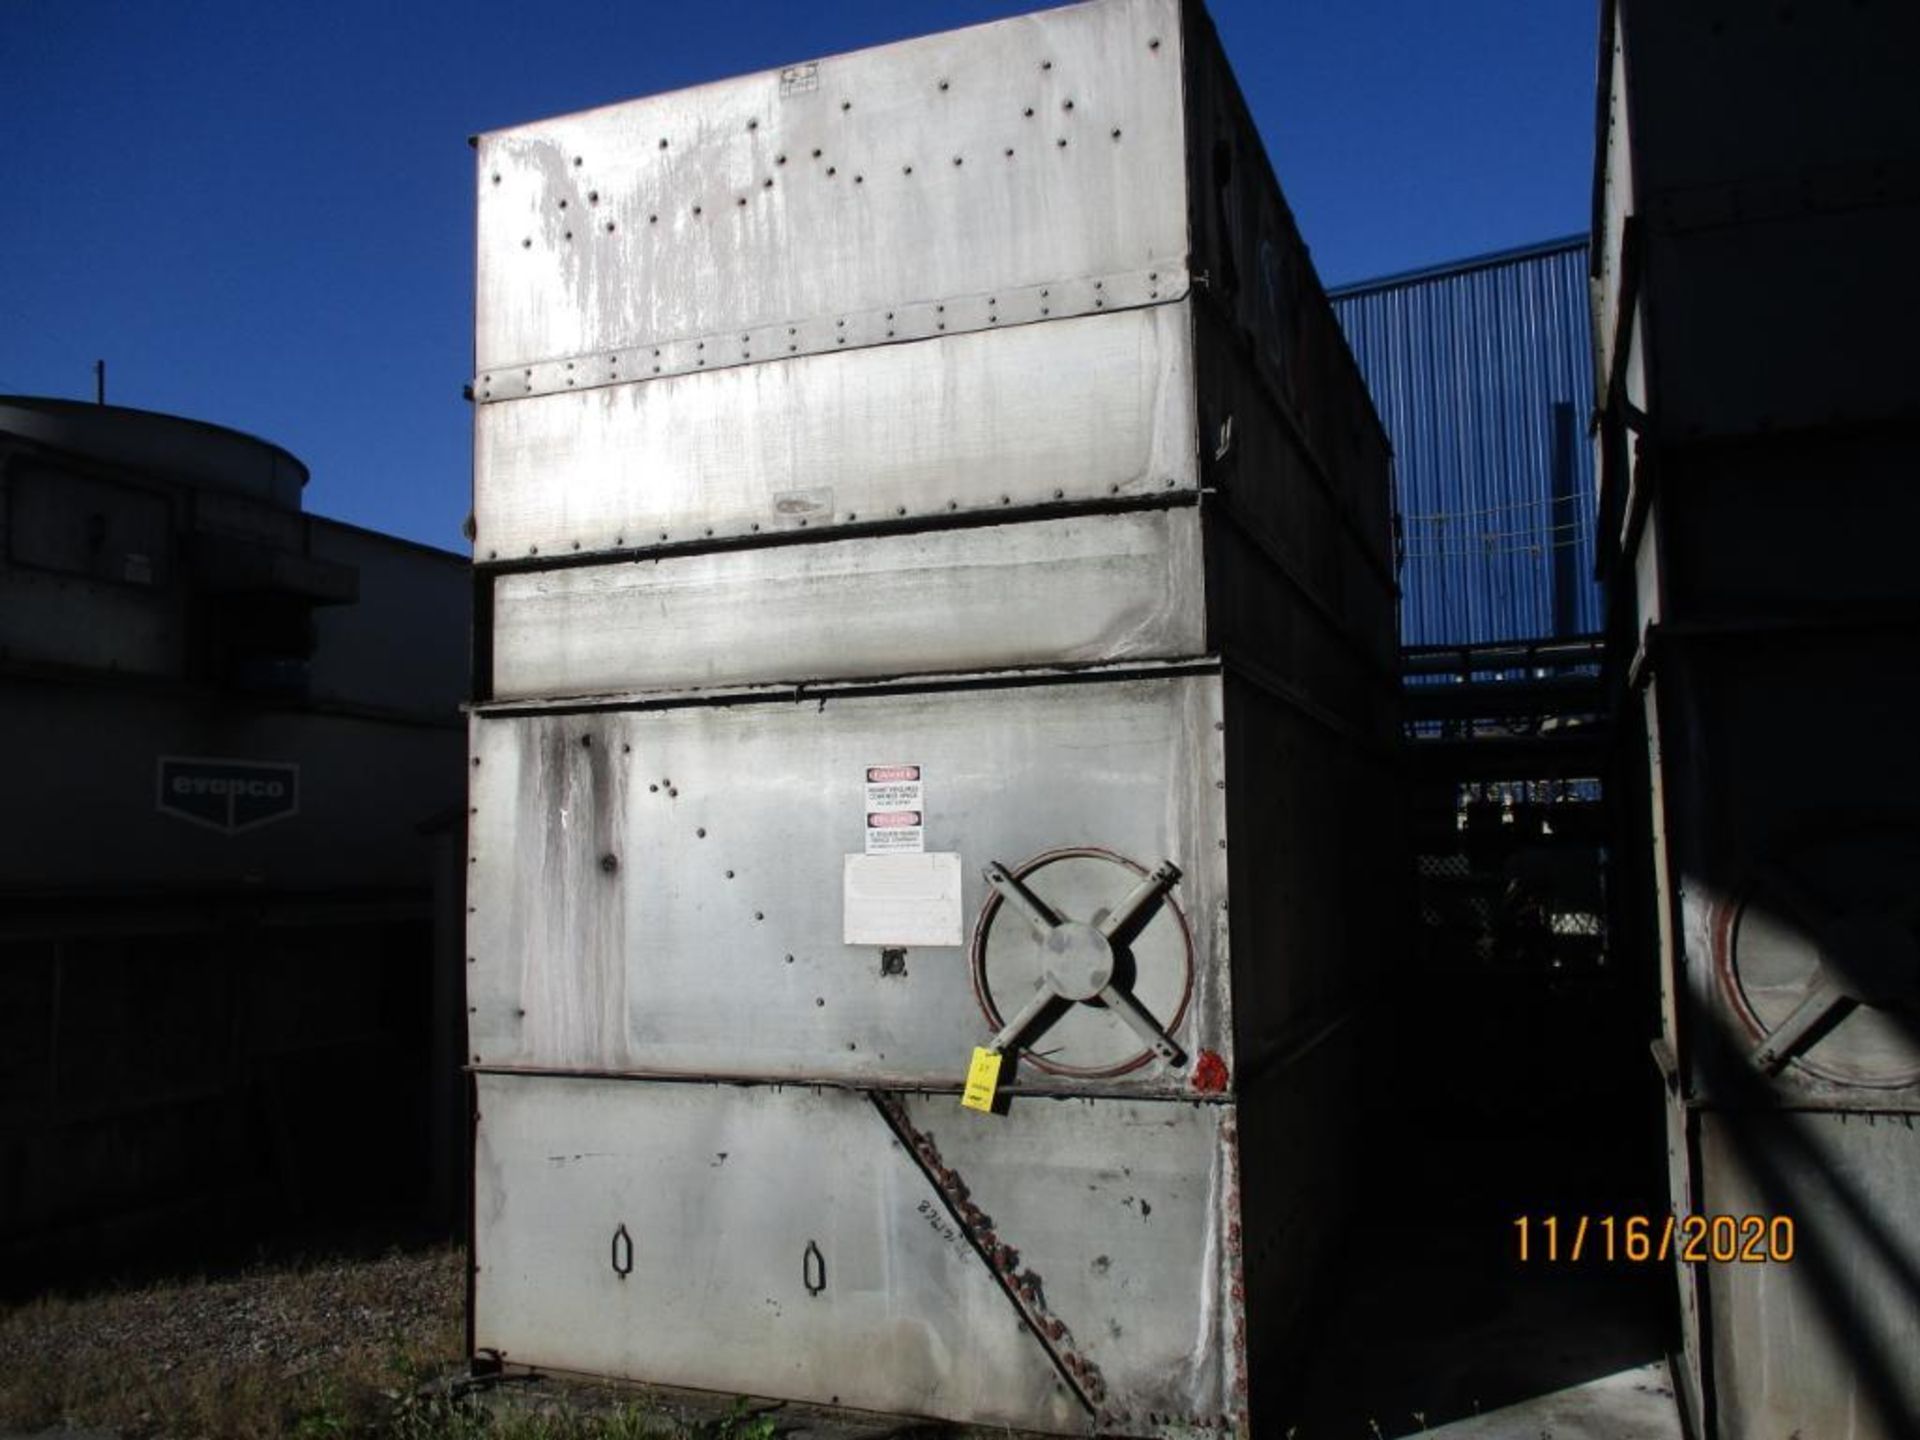 BAC 3-Fan Cooling Tower Model F1402-PX, S/N 97100512 (LOCATED IN COLUMBIANA, AL)